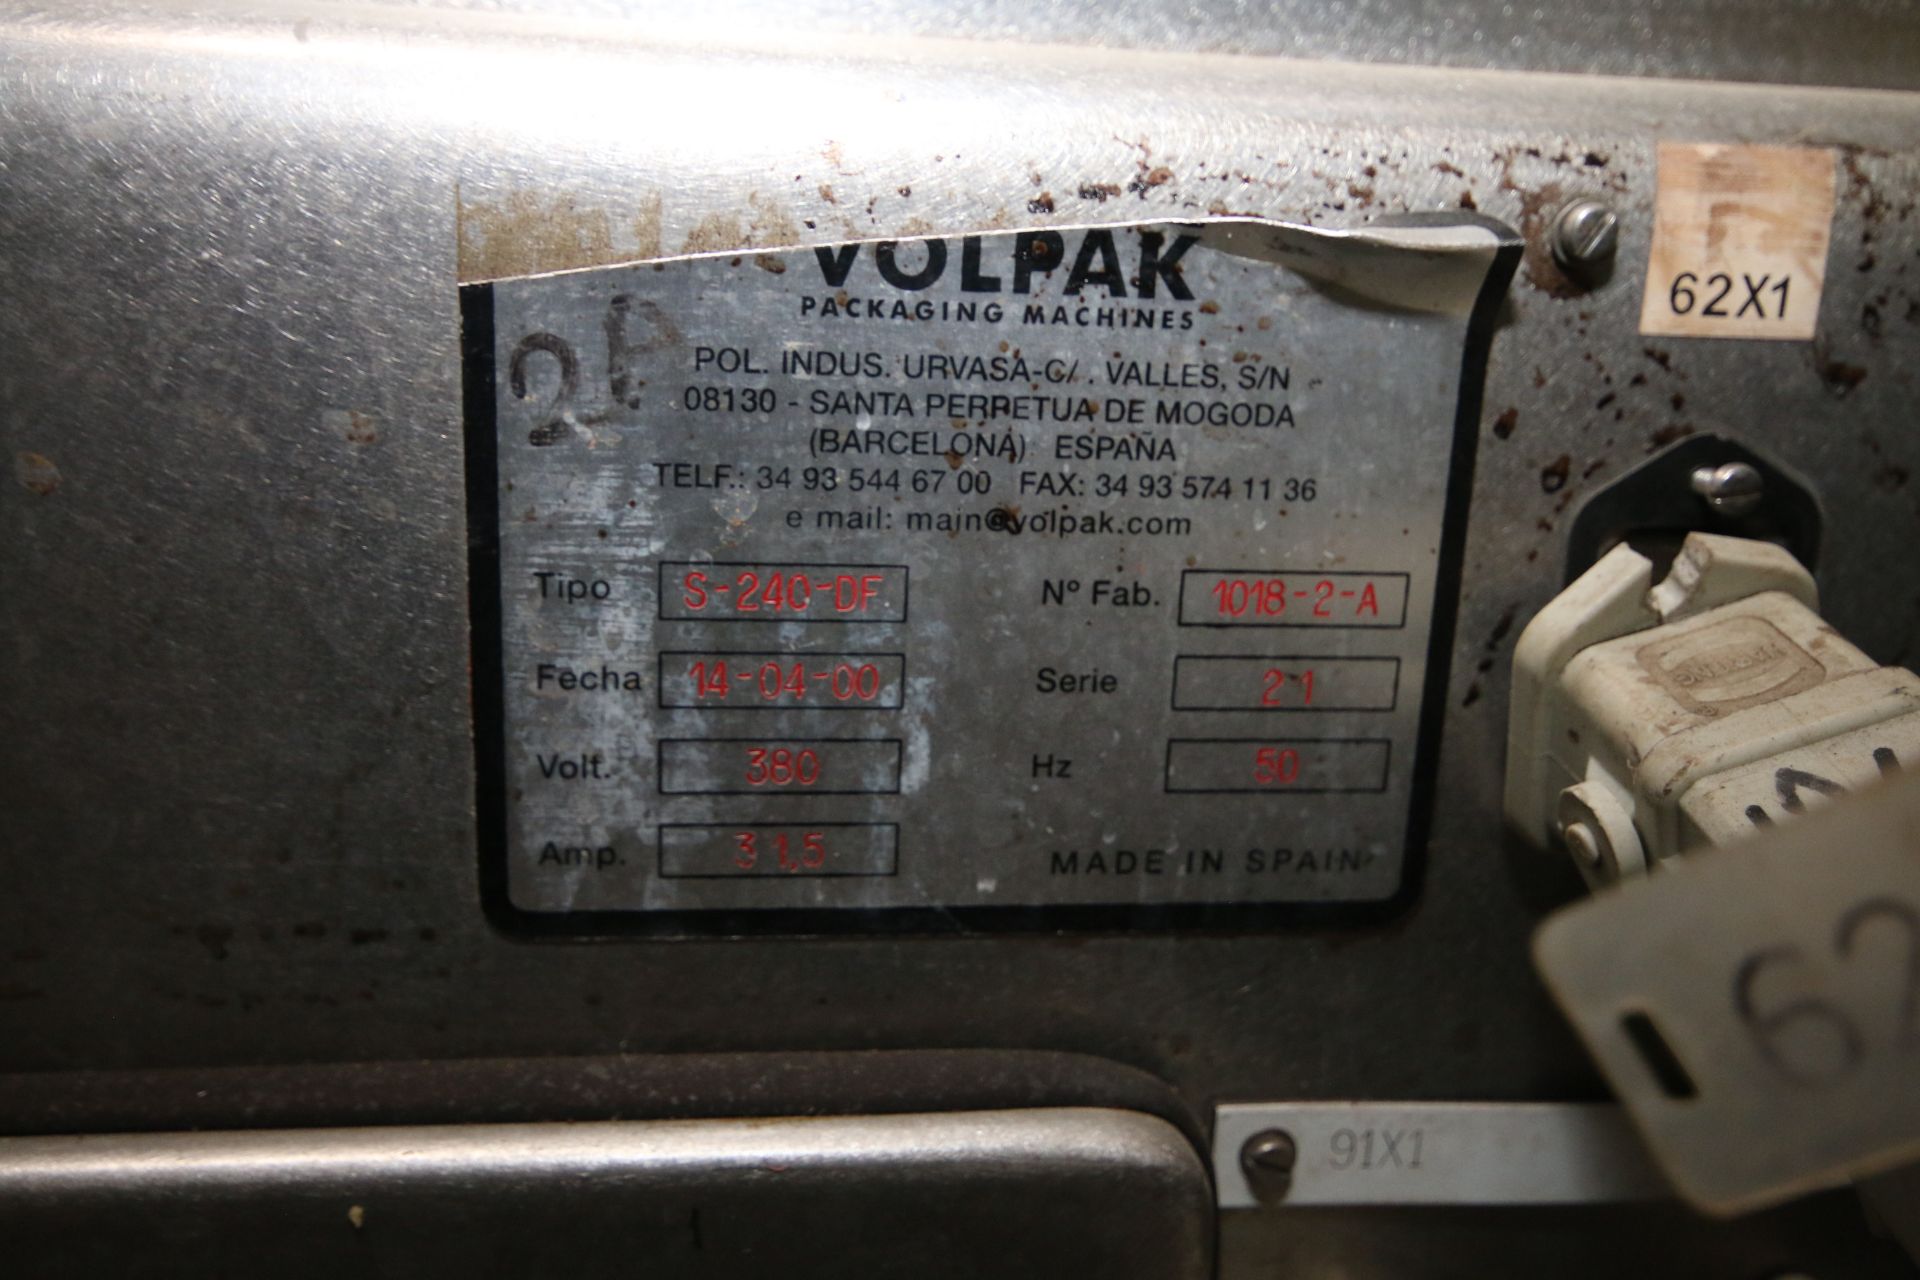 Volpak Pouch Filler, M/N S-240-DF, Fecha 14-04-00, N Fab 1018-2-A, with S/S Infeed Vessel/Funnel and - Image 10 of 12